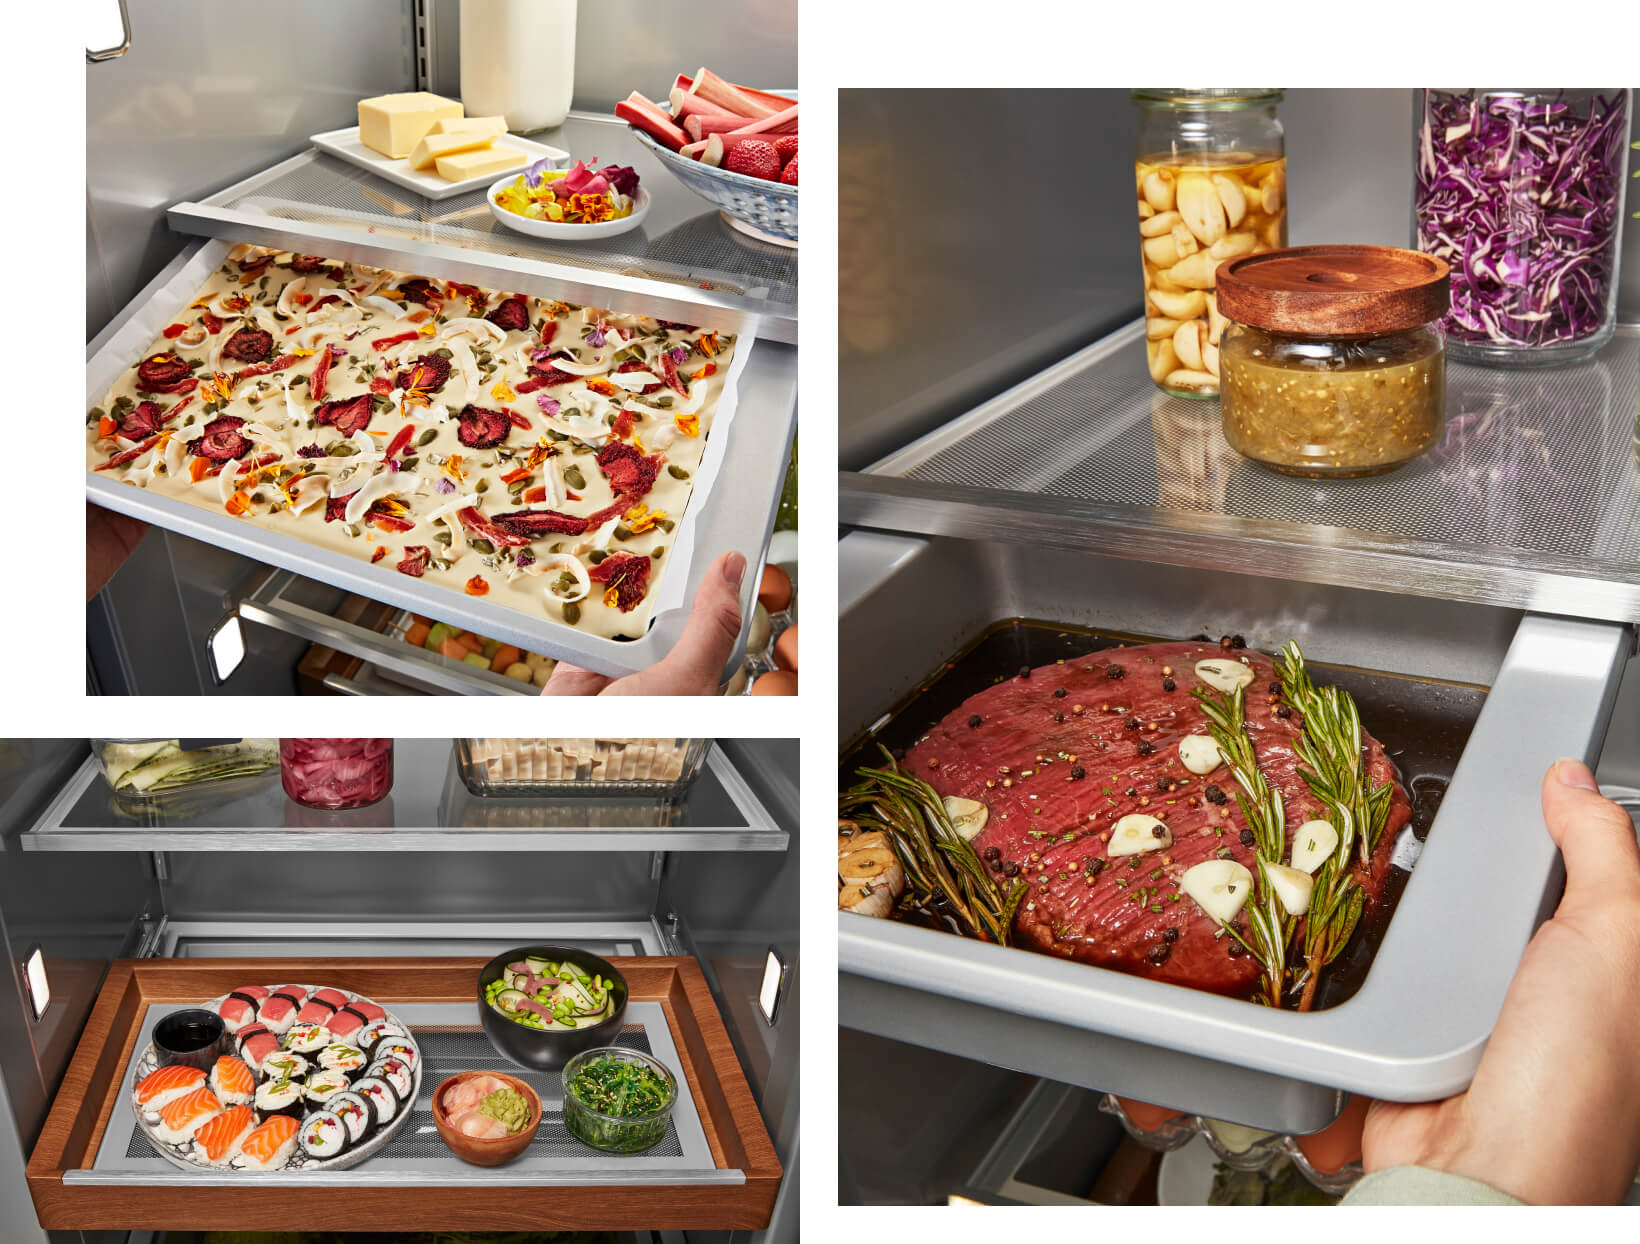 The Under-Shelf Prep Tray and Sliding Storage Tray showing prepared foods and meals.